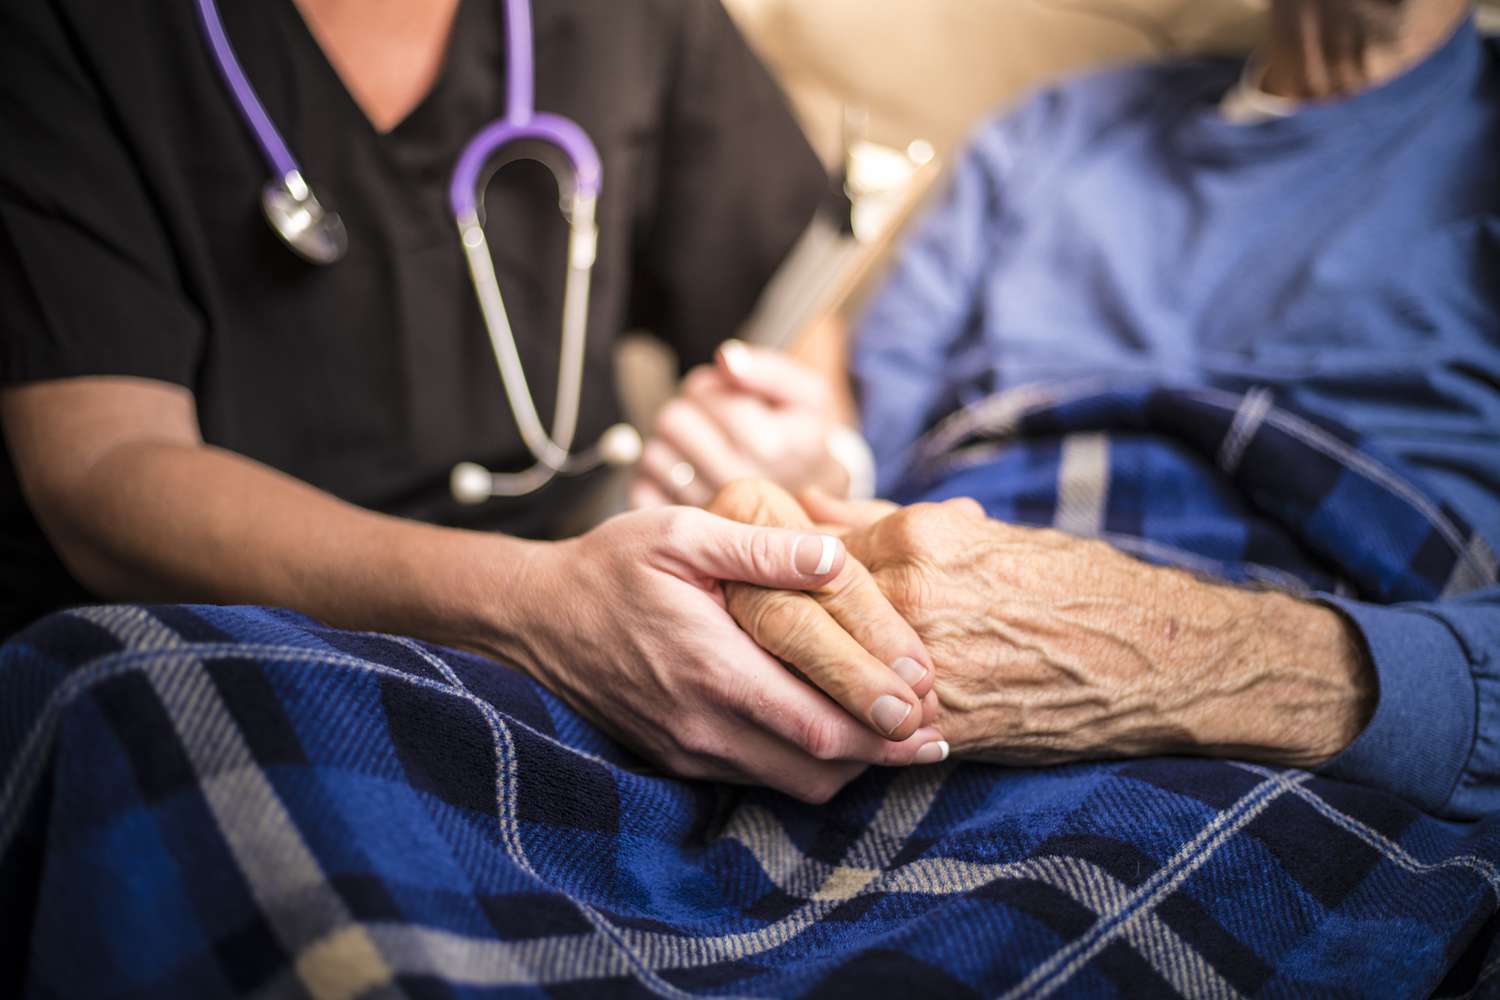 What makes Comfort Care Hospice unique in end-of-life care?